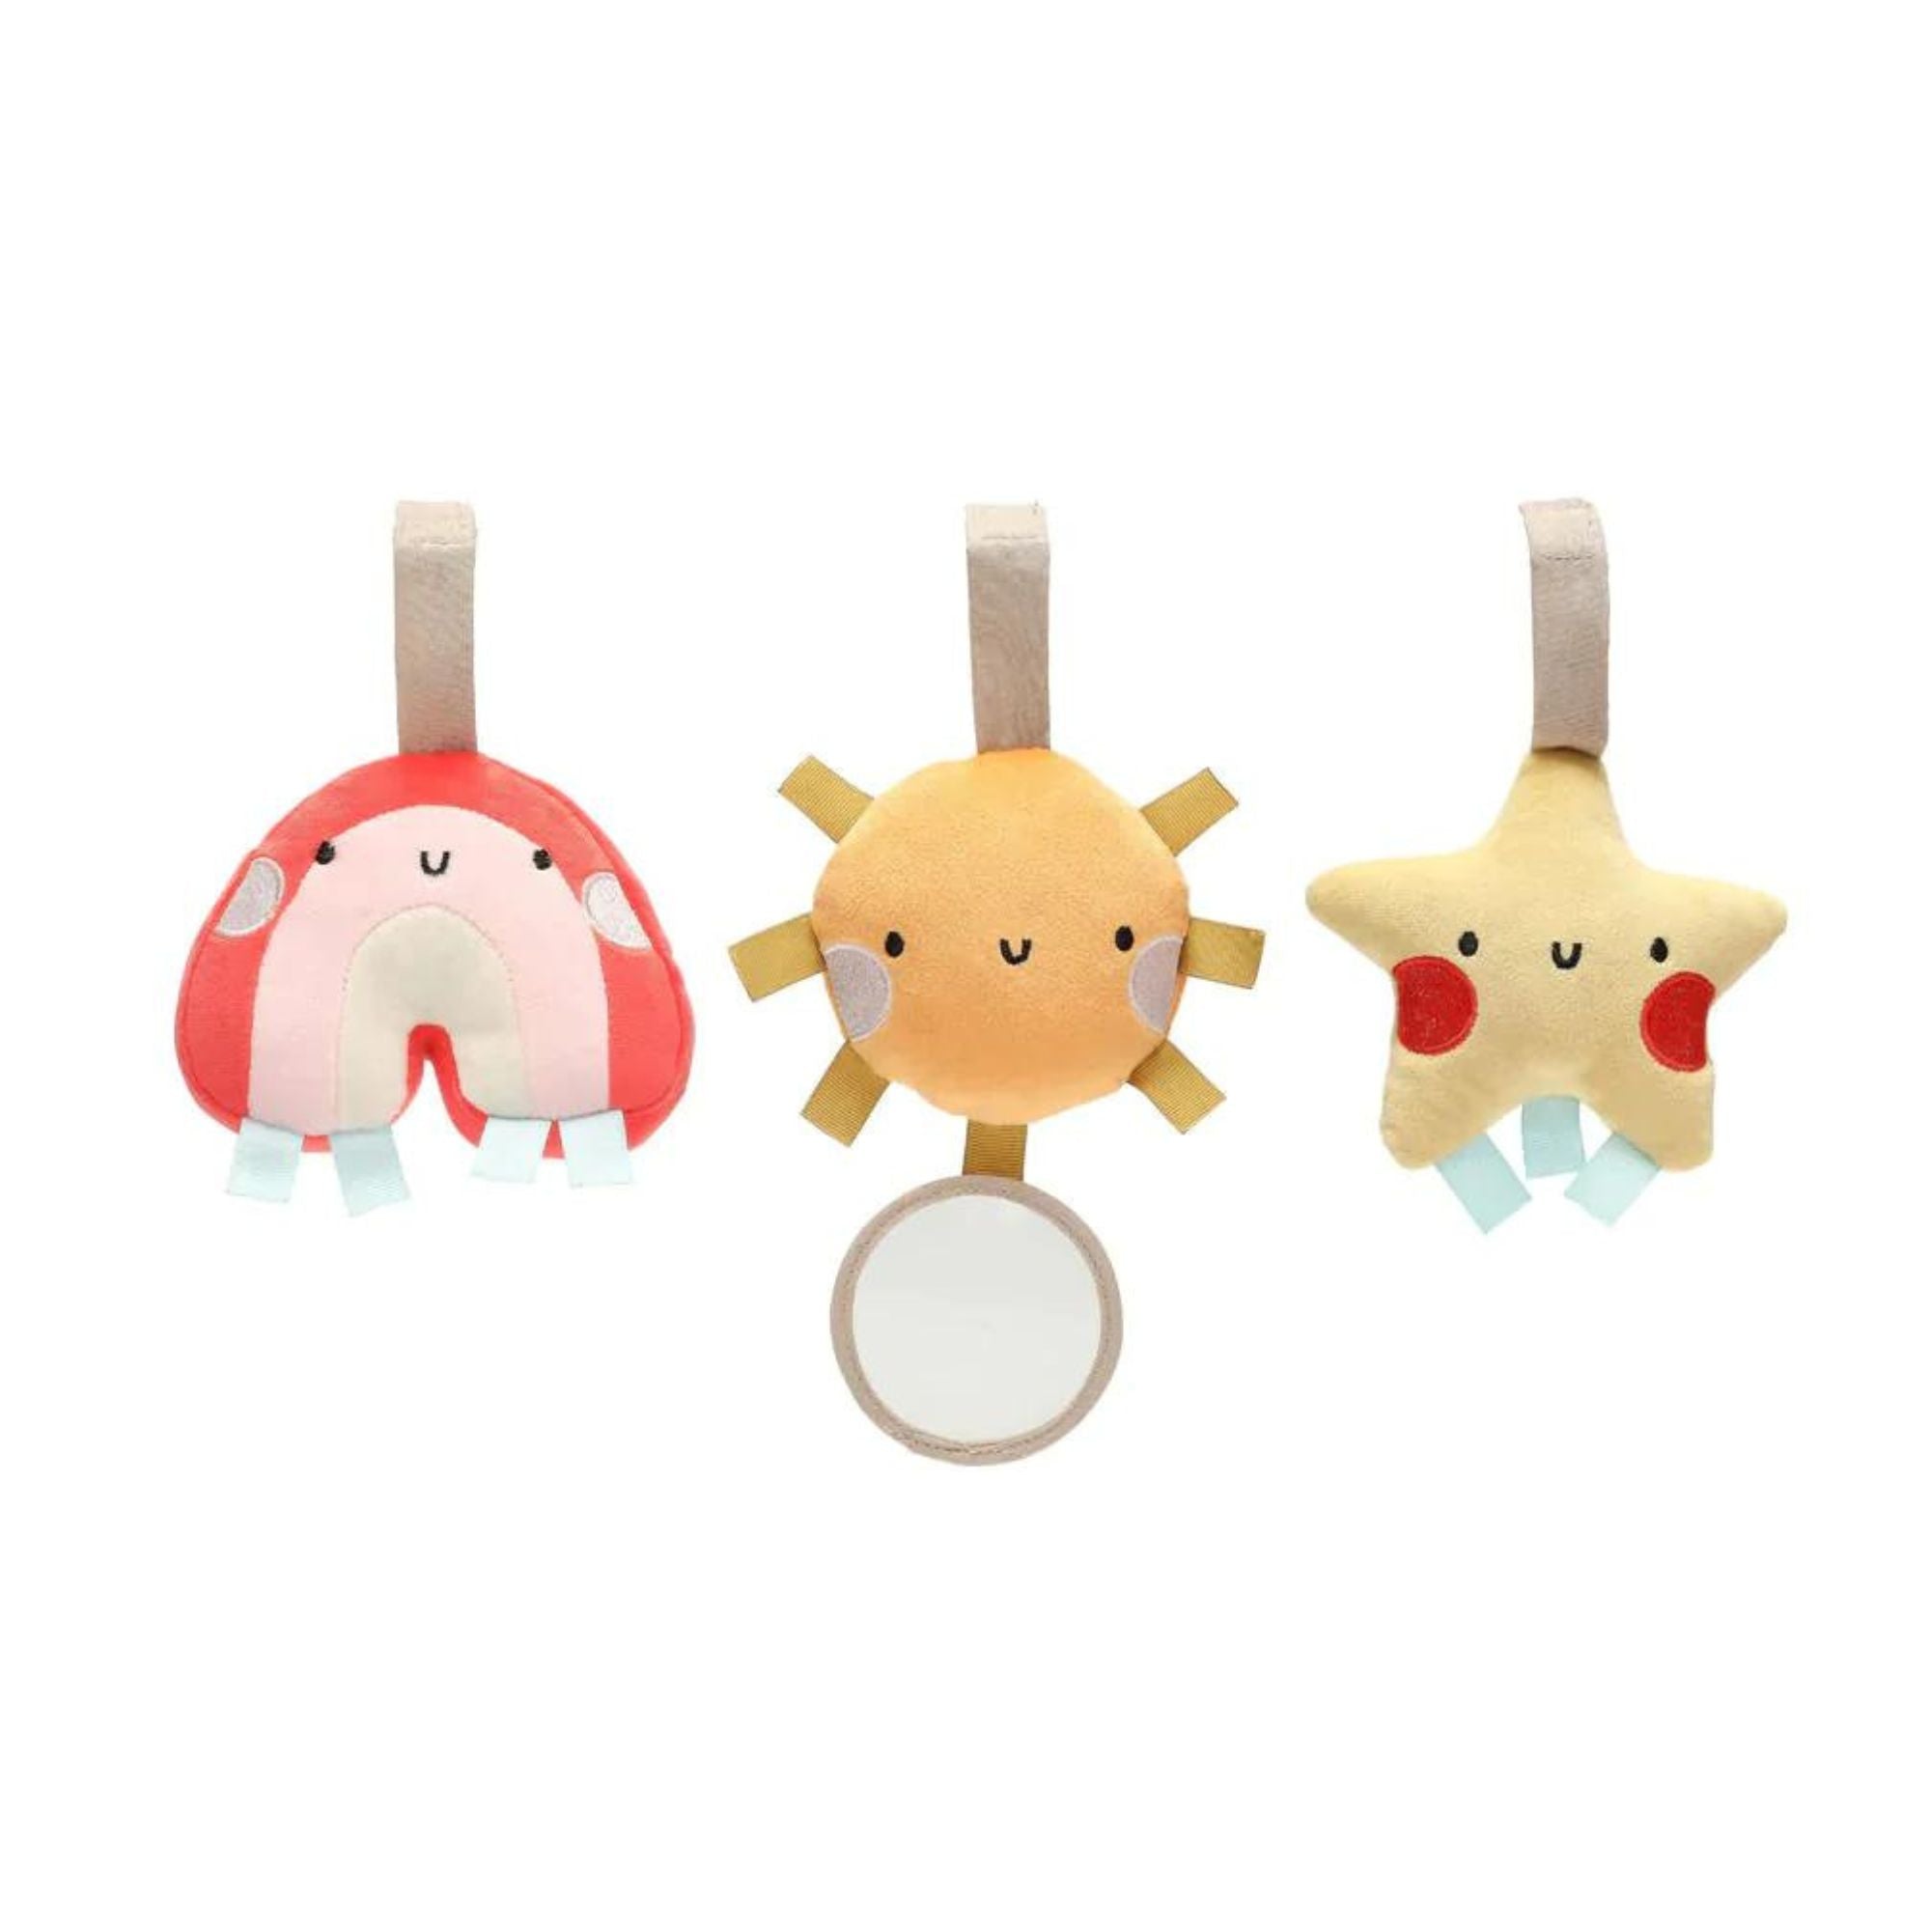 Pearhead Stroller Toy Set of 3 - Rainbow - Tiny Tots Baby Store 